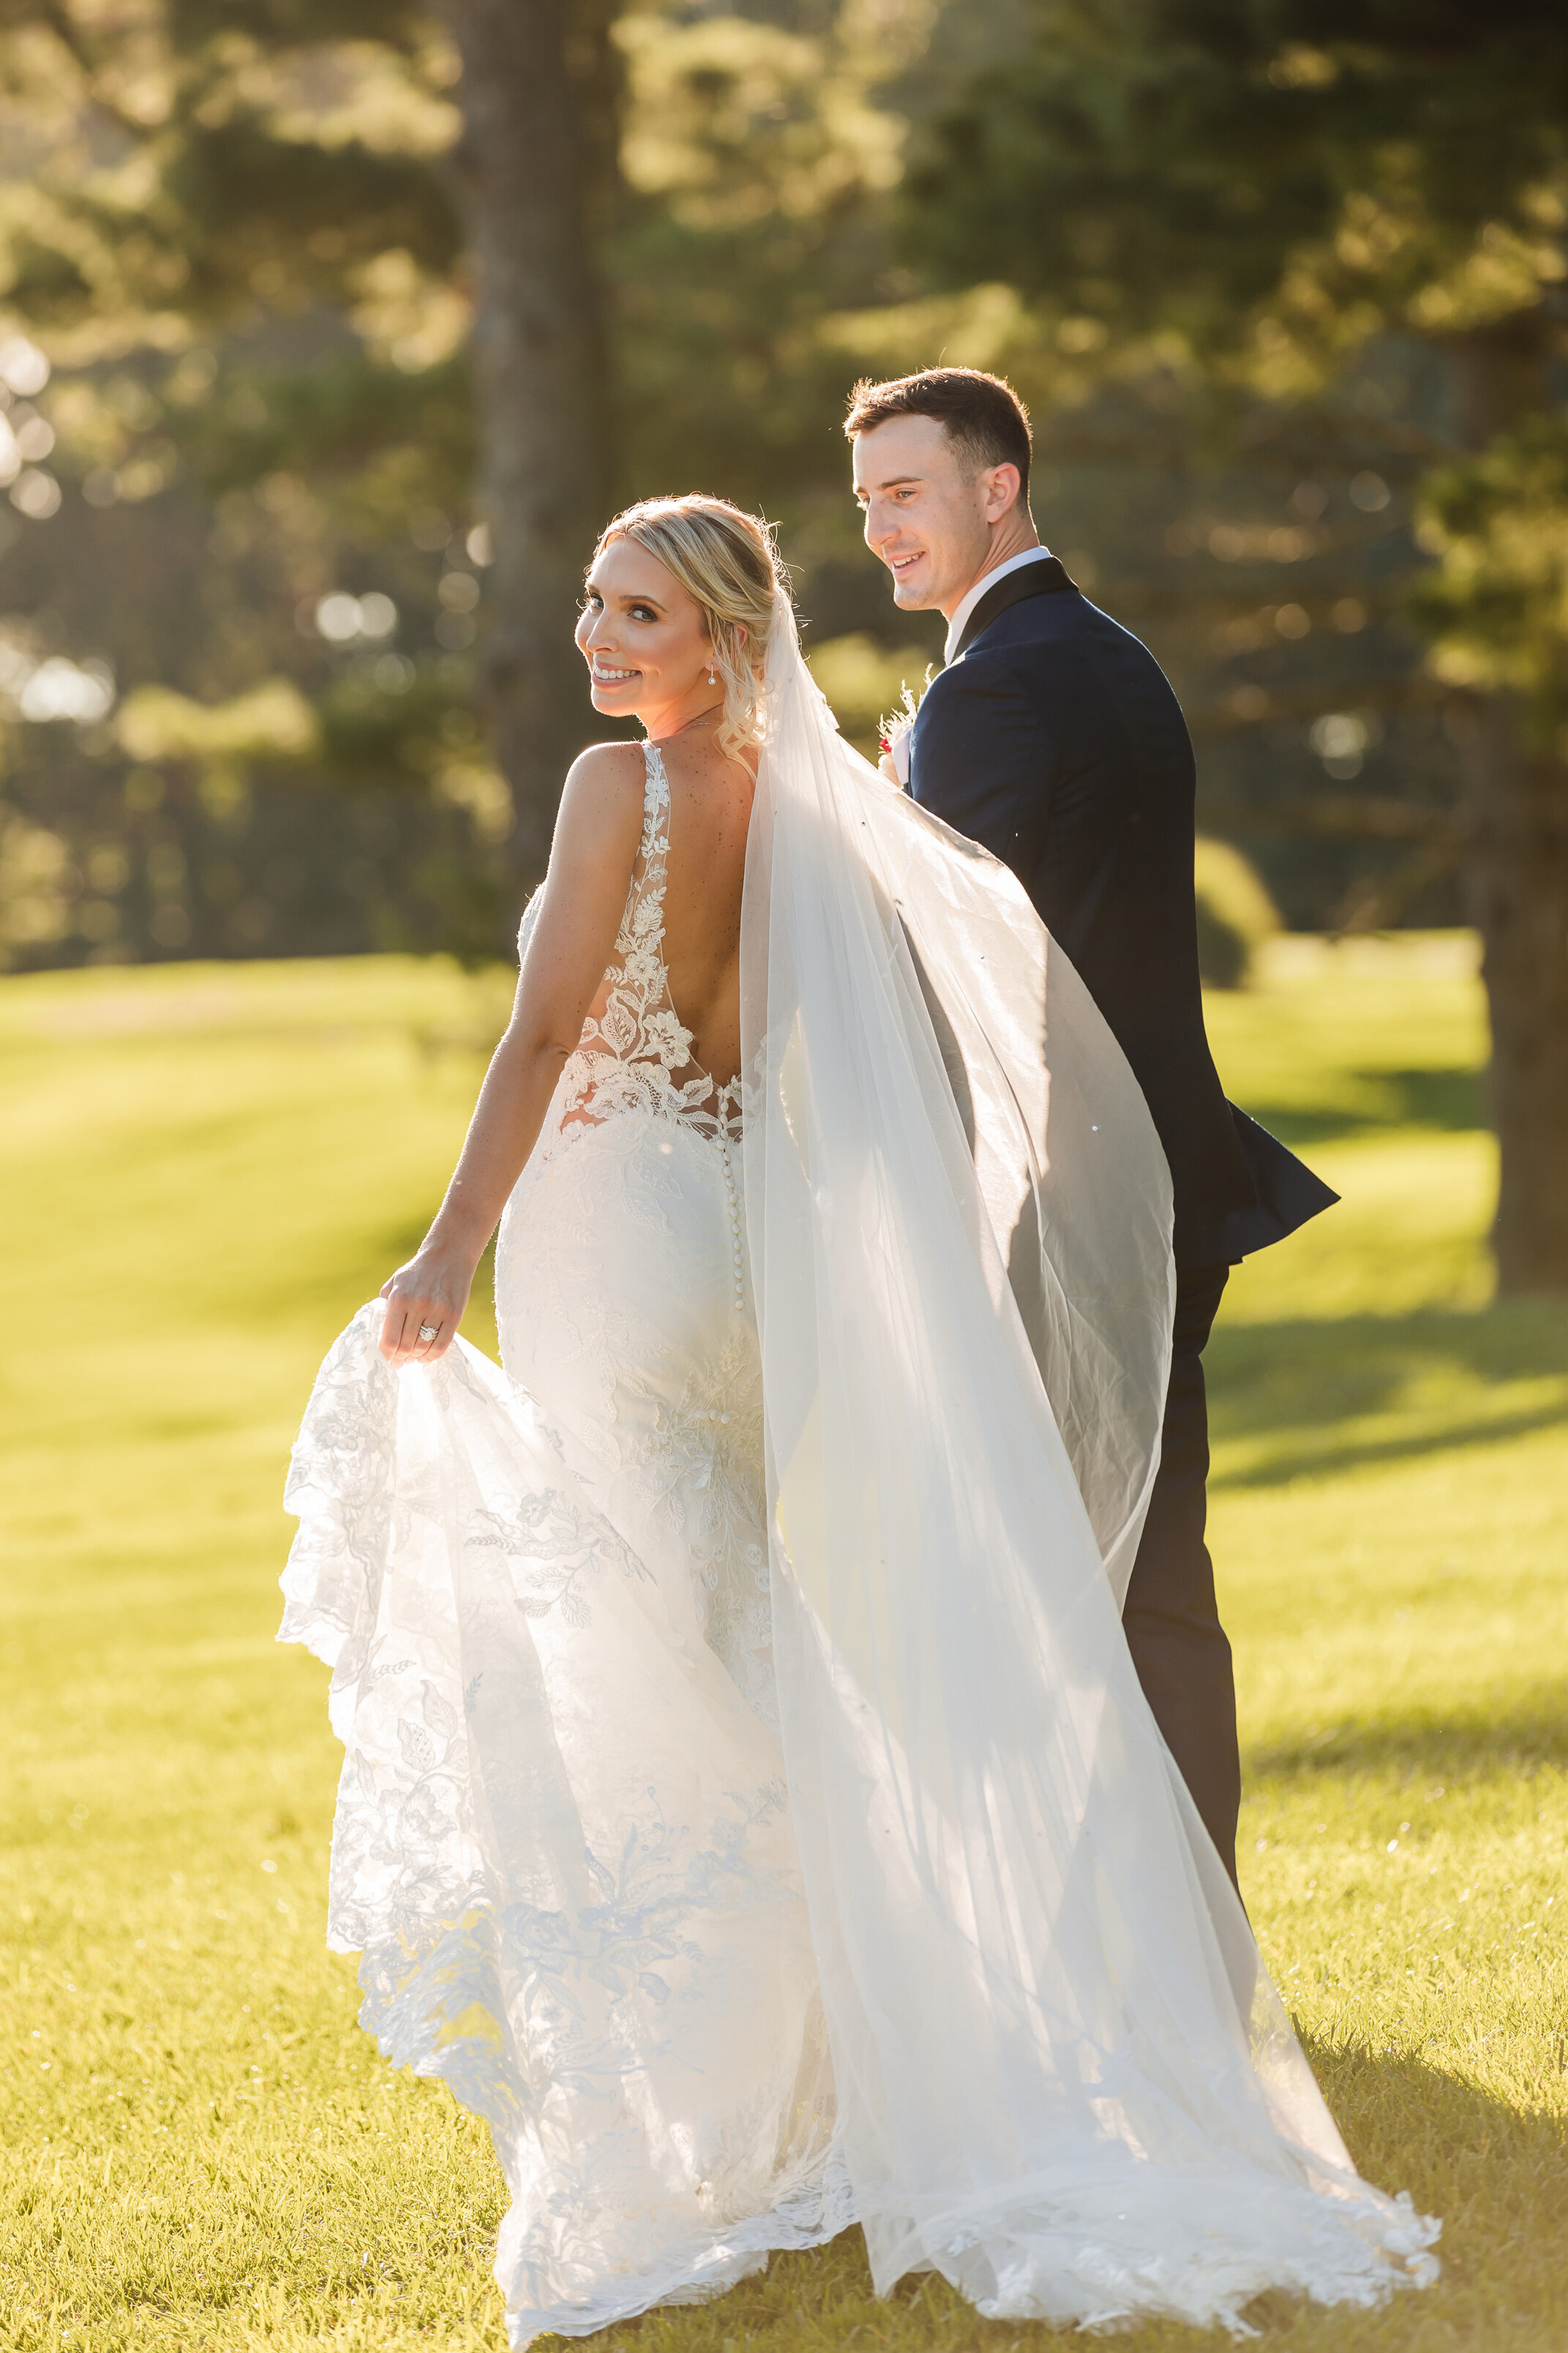 Bride and groom walking at Park Chateau after their wedding ceremony during the golden hour.